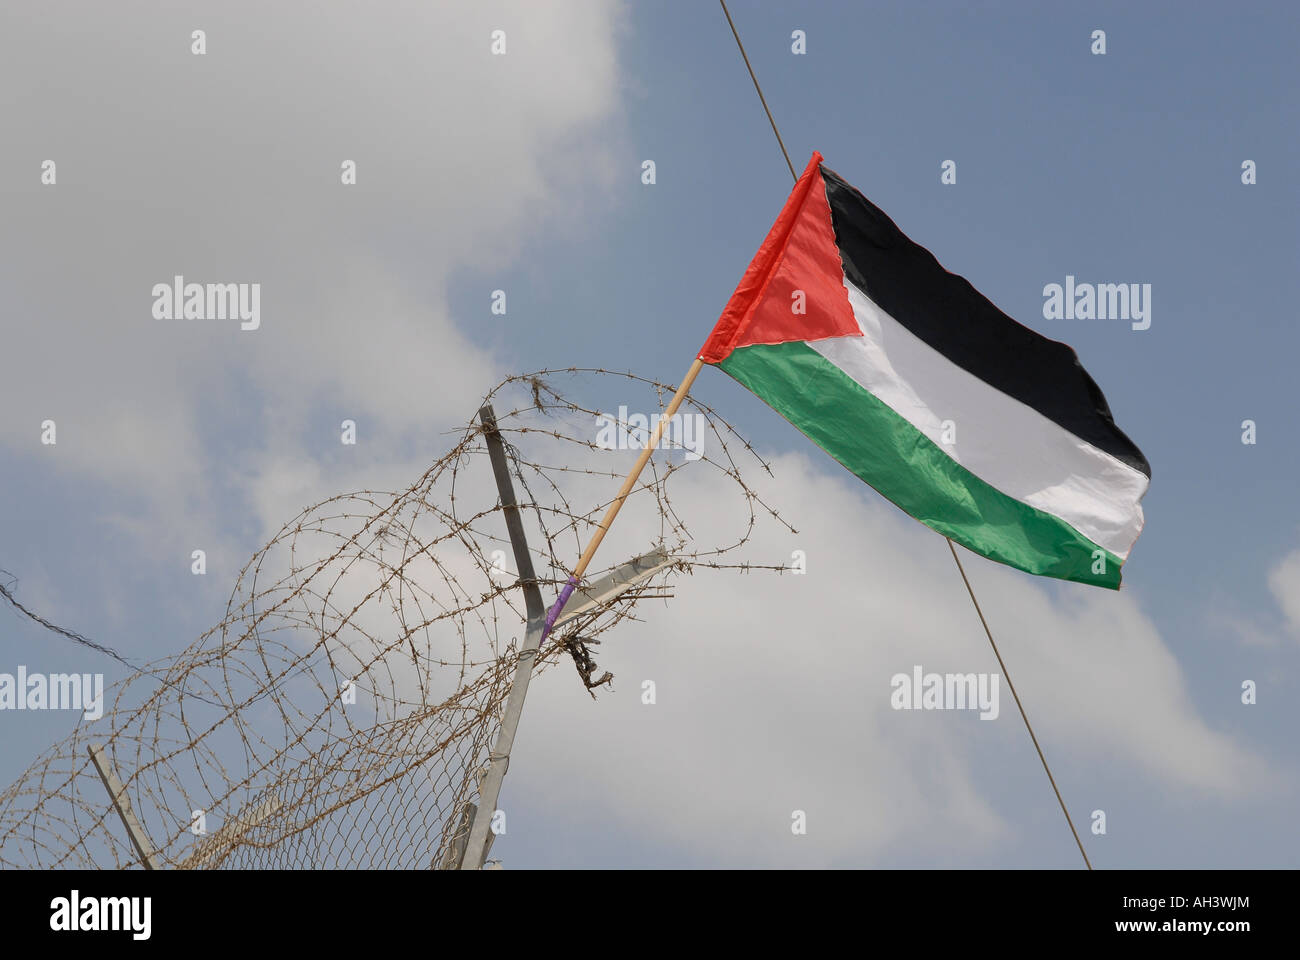 Palestinian flag over barbwire fence in the West Bank Israel Stock Photo